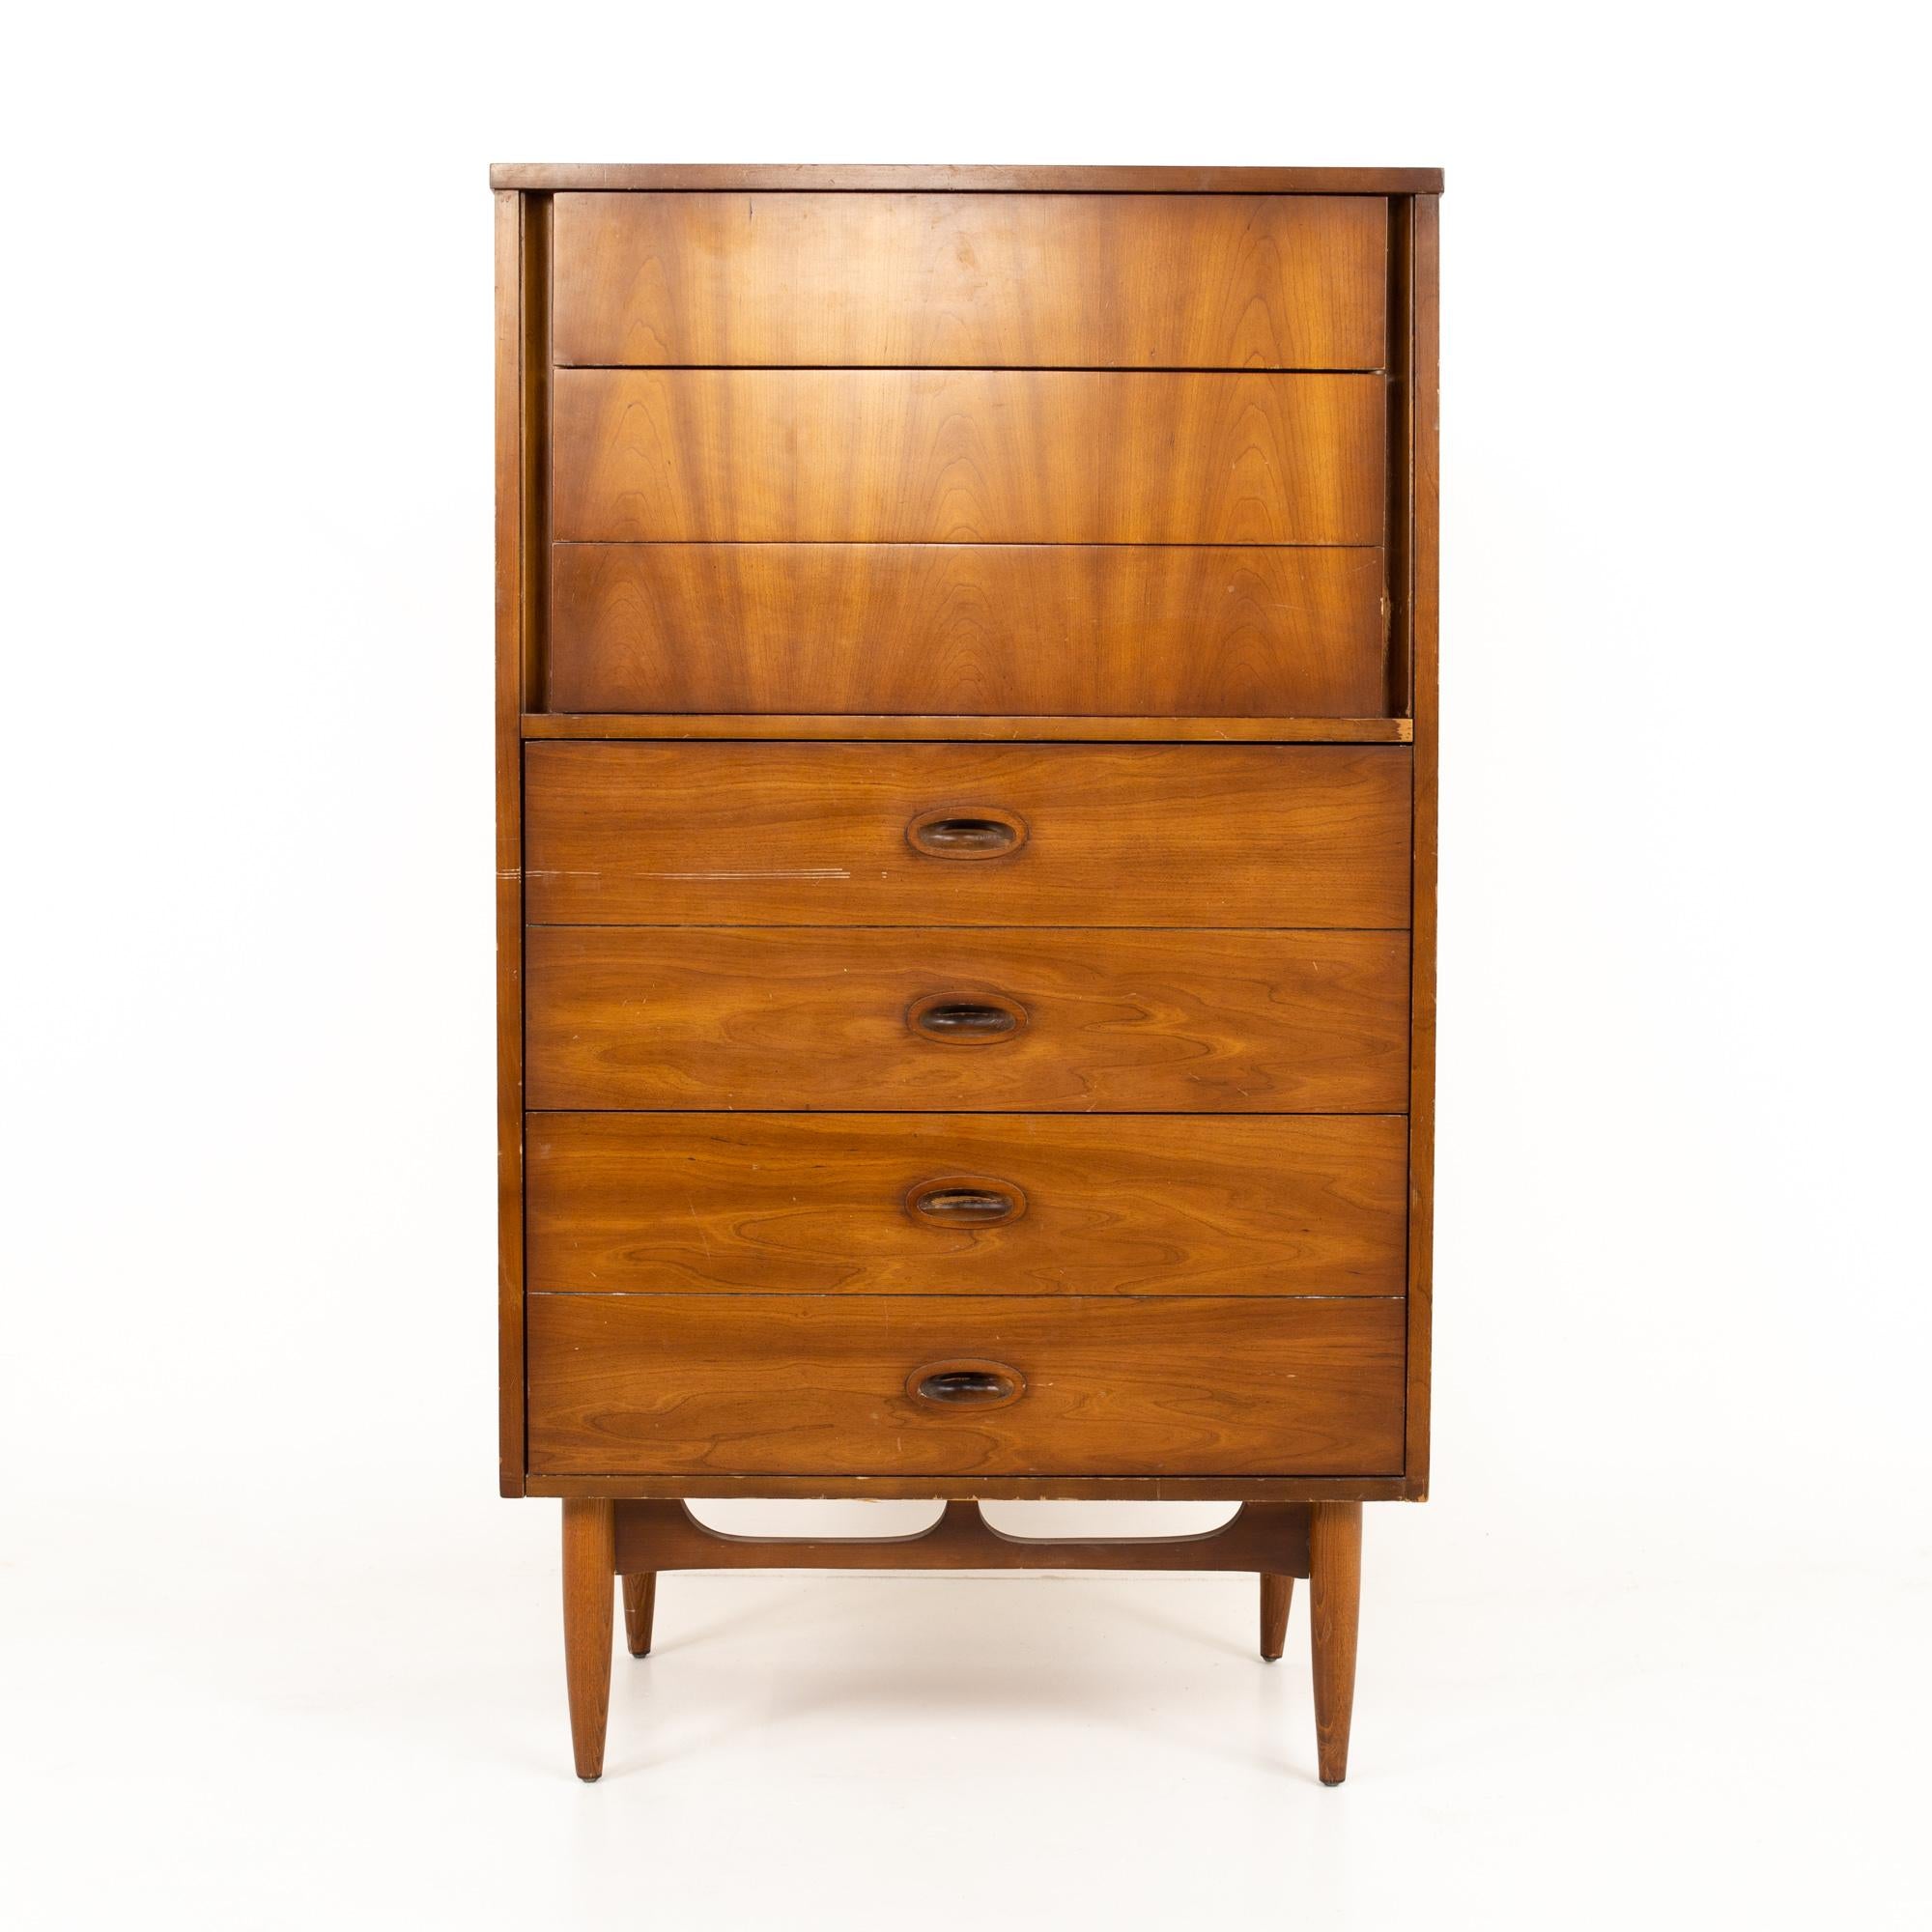 Dixie midcentury walnut 7-drawer thin highboy dresser
Dresser measures: 30.25 wide x 18.75 deep x 52.25 high


This price includes getting this piece in what we call restored vintage condition. That means the piece is permanently fixed upon